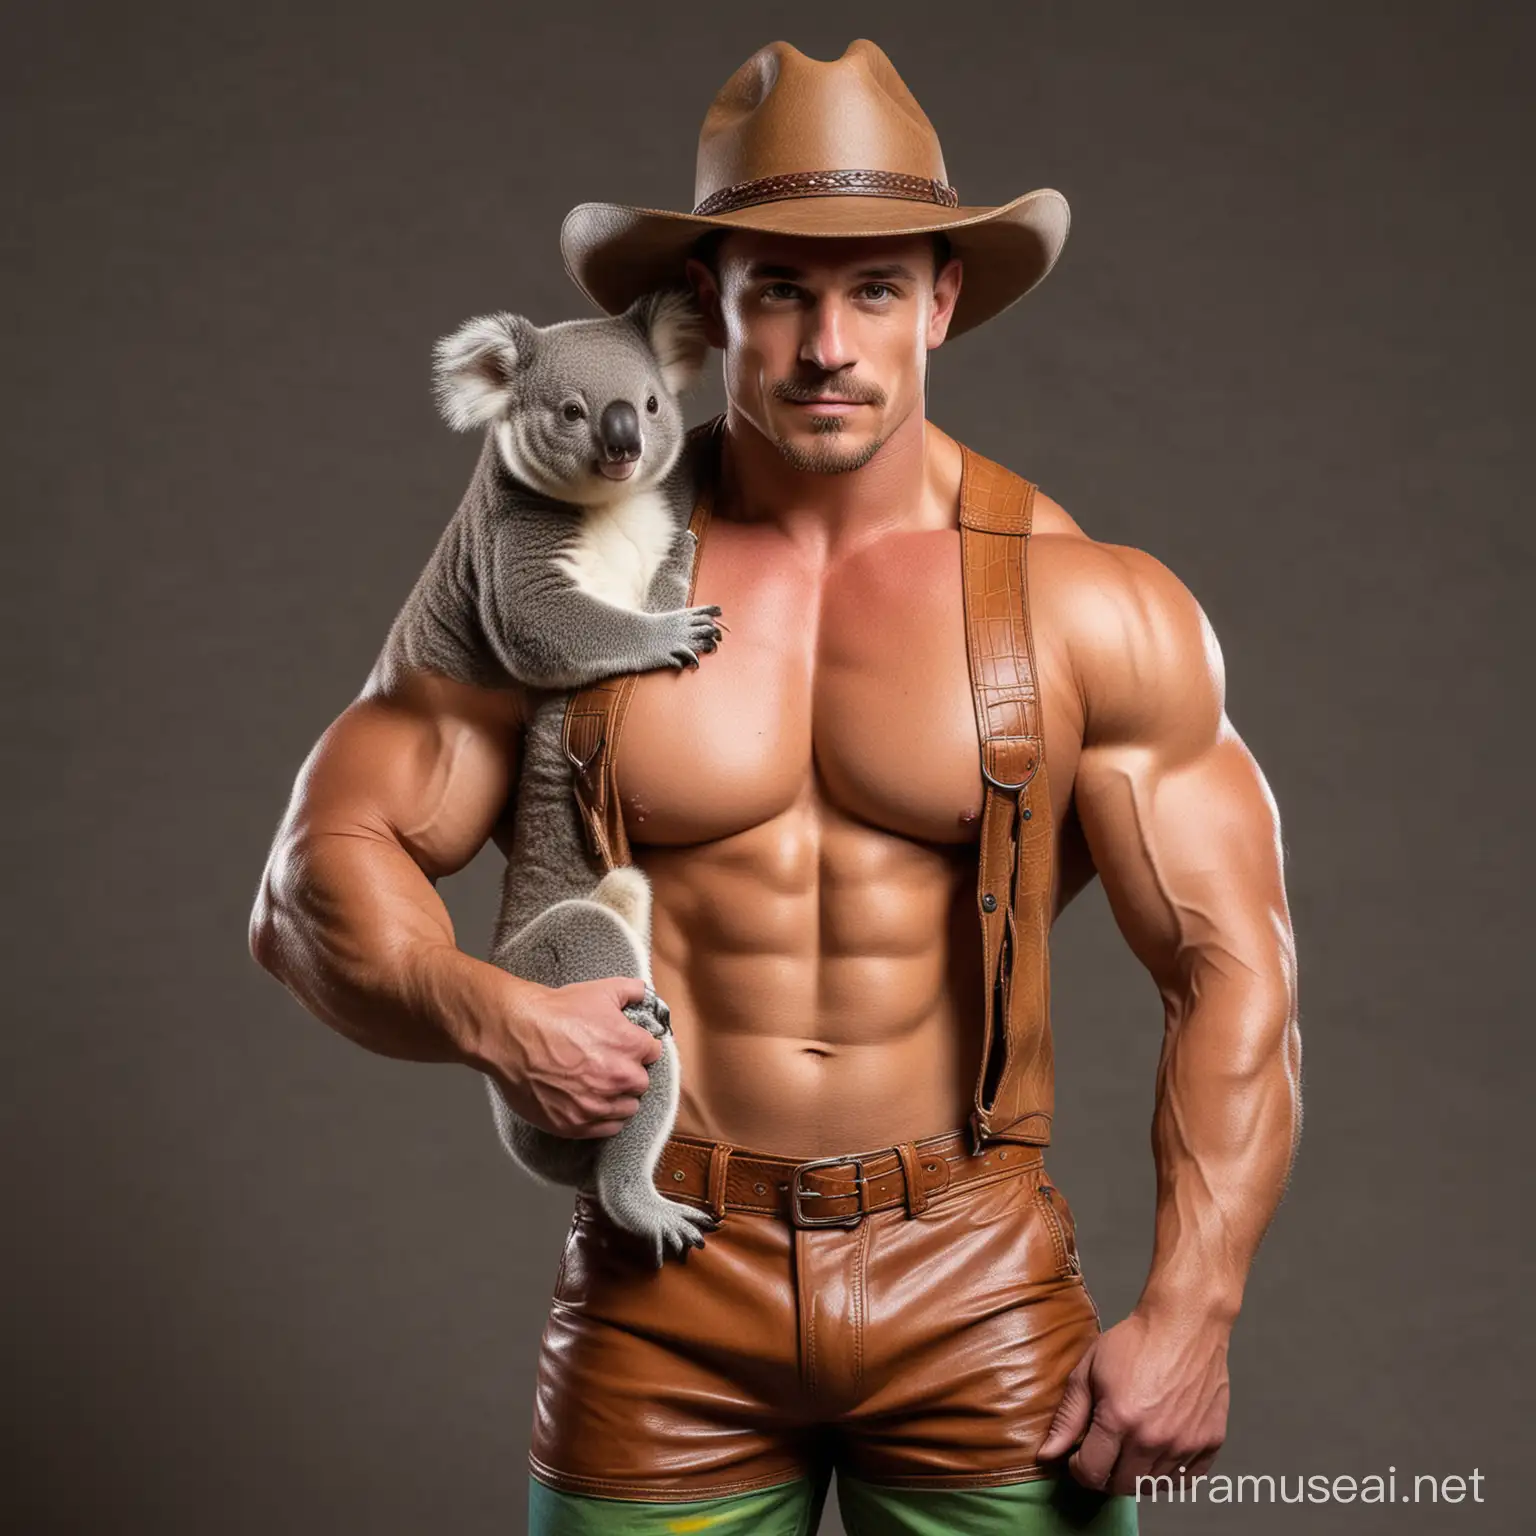 Very Beefy Muscled IFBB Professional Topless Bodybuilder just wearing unbuttoned brown leather Vest genuine crocodile skin Rainbow coloured Shorts authentic Akubra hat holding up Cute Small Koala